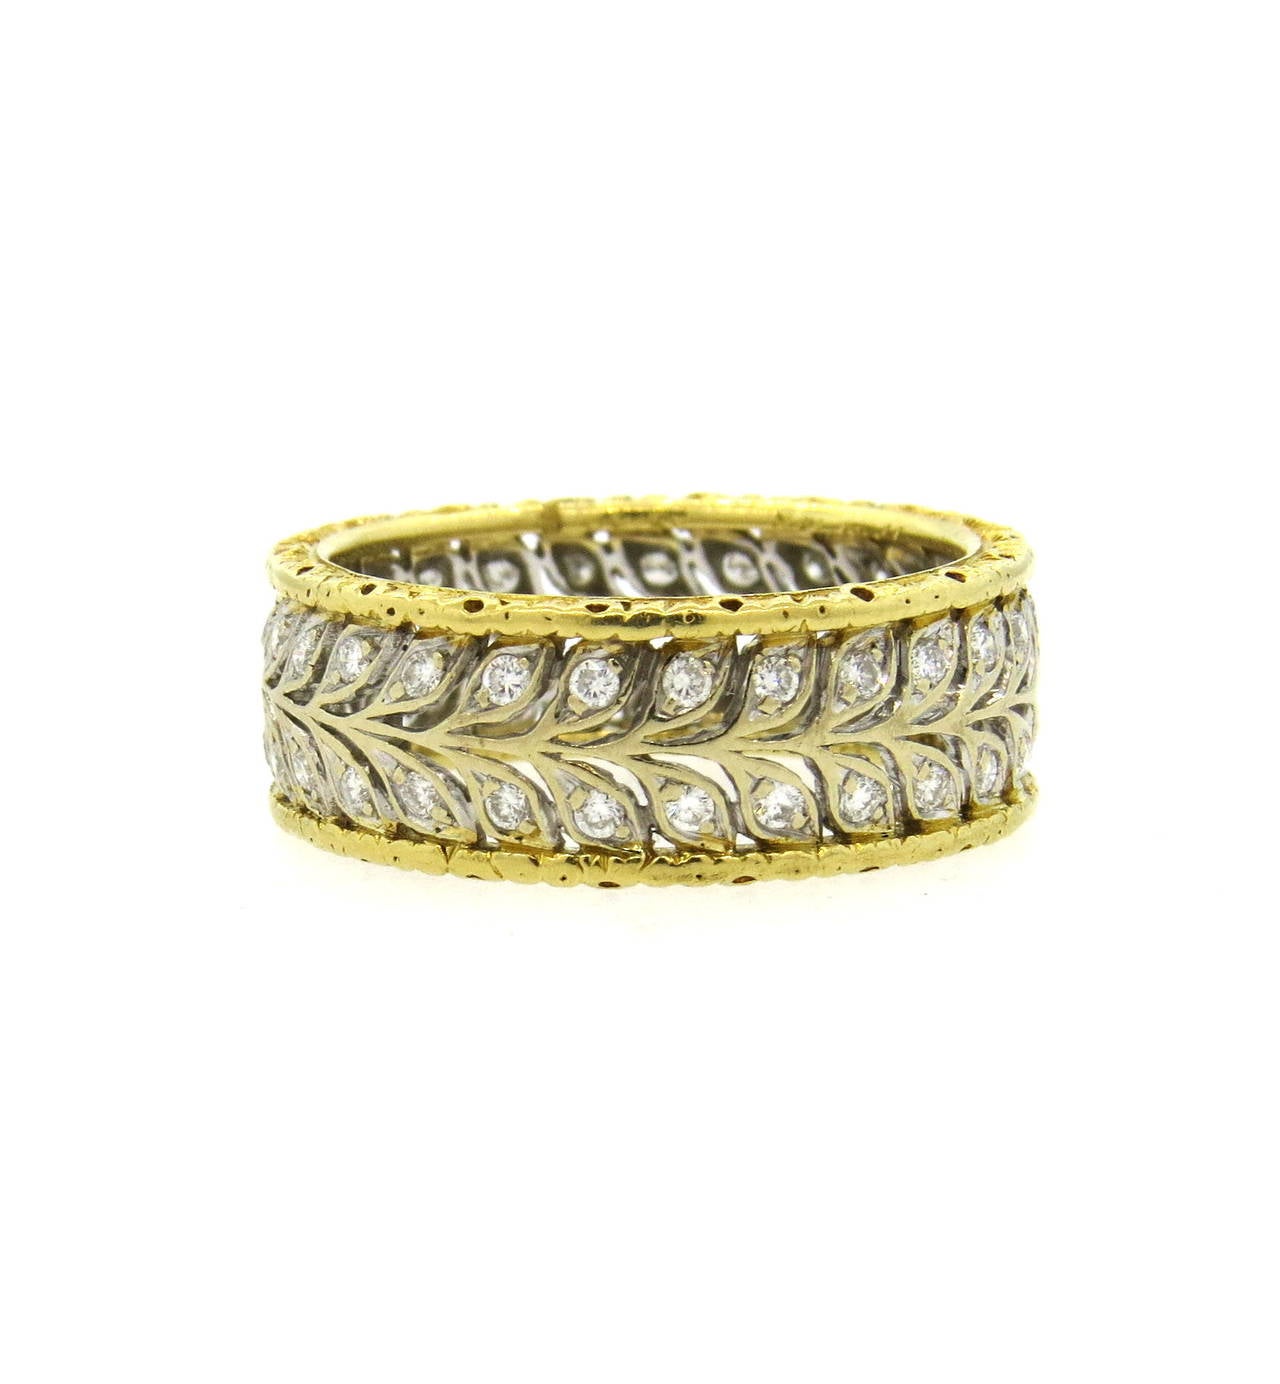 Beautiful 18k gold band ring by Buccellati, adorned with diamonds. Ring is a size 8 and is 8mm wide. Marked Buccellati and 750. Weight of the piece - 6.5 grams